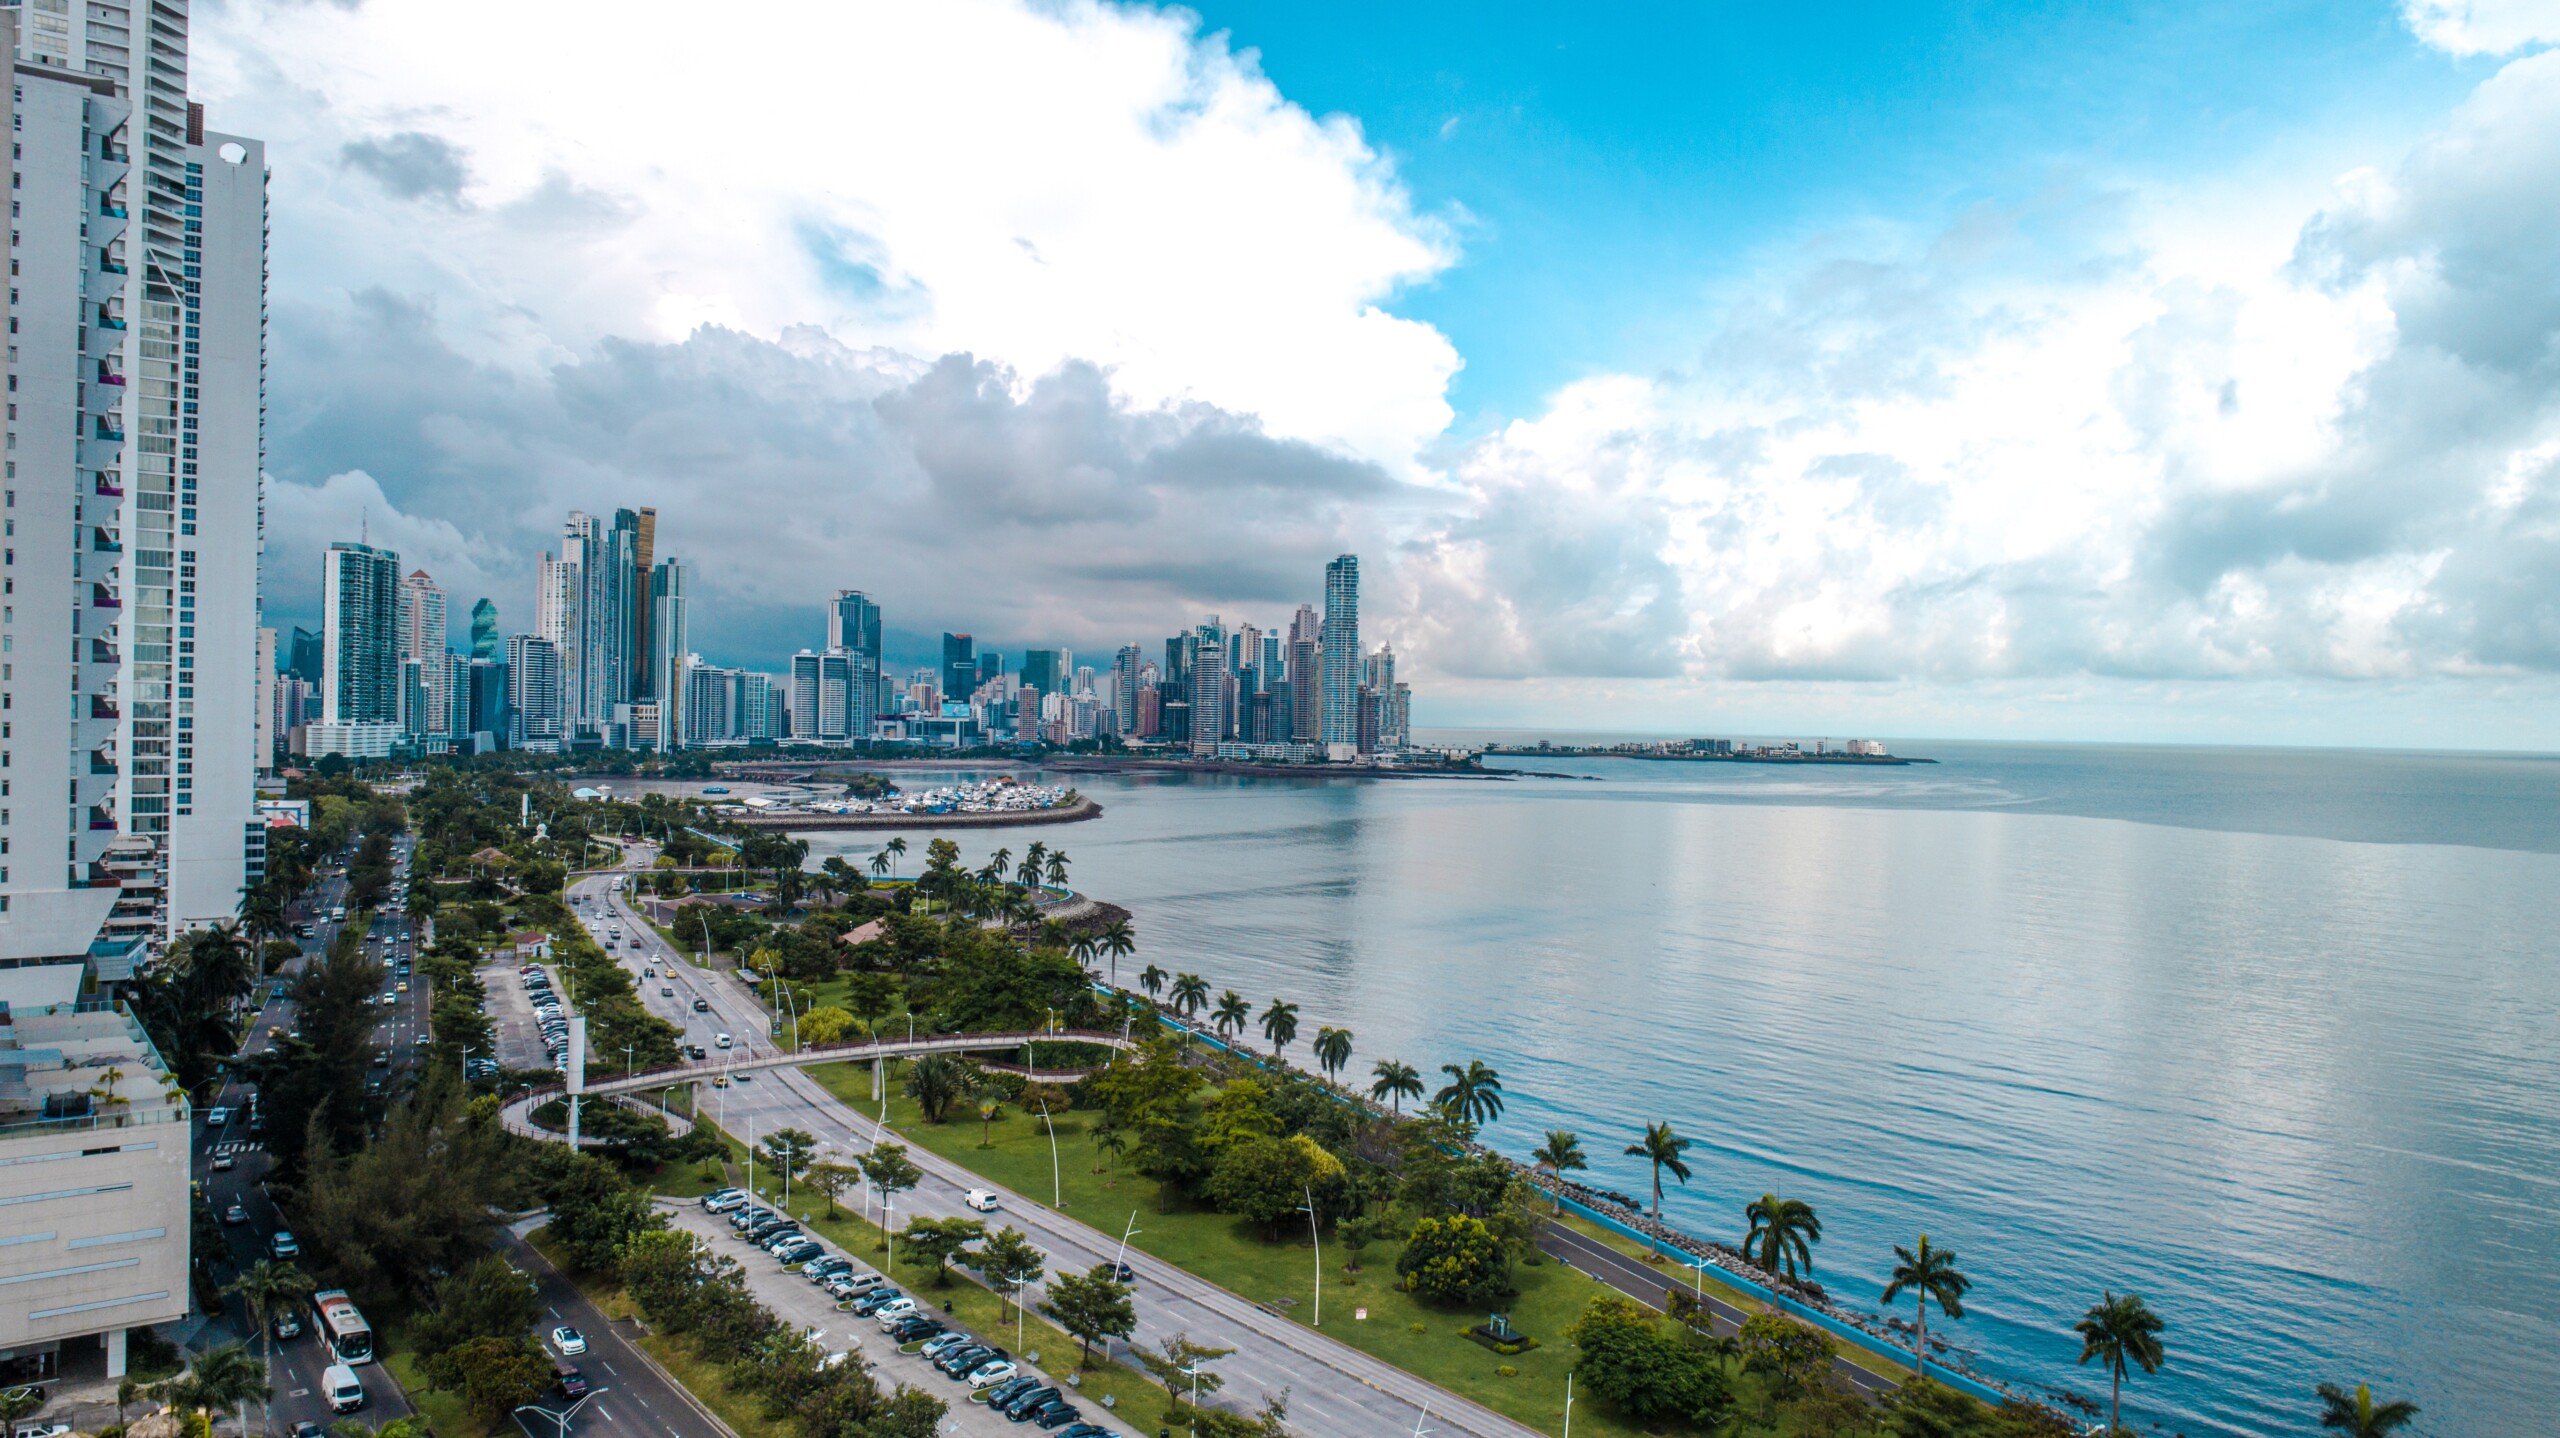 Benefits of relocating to Panama